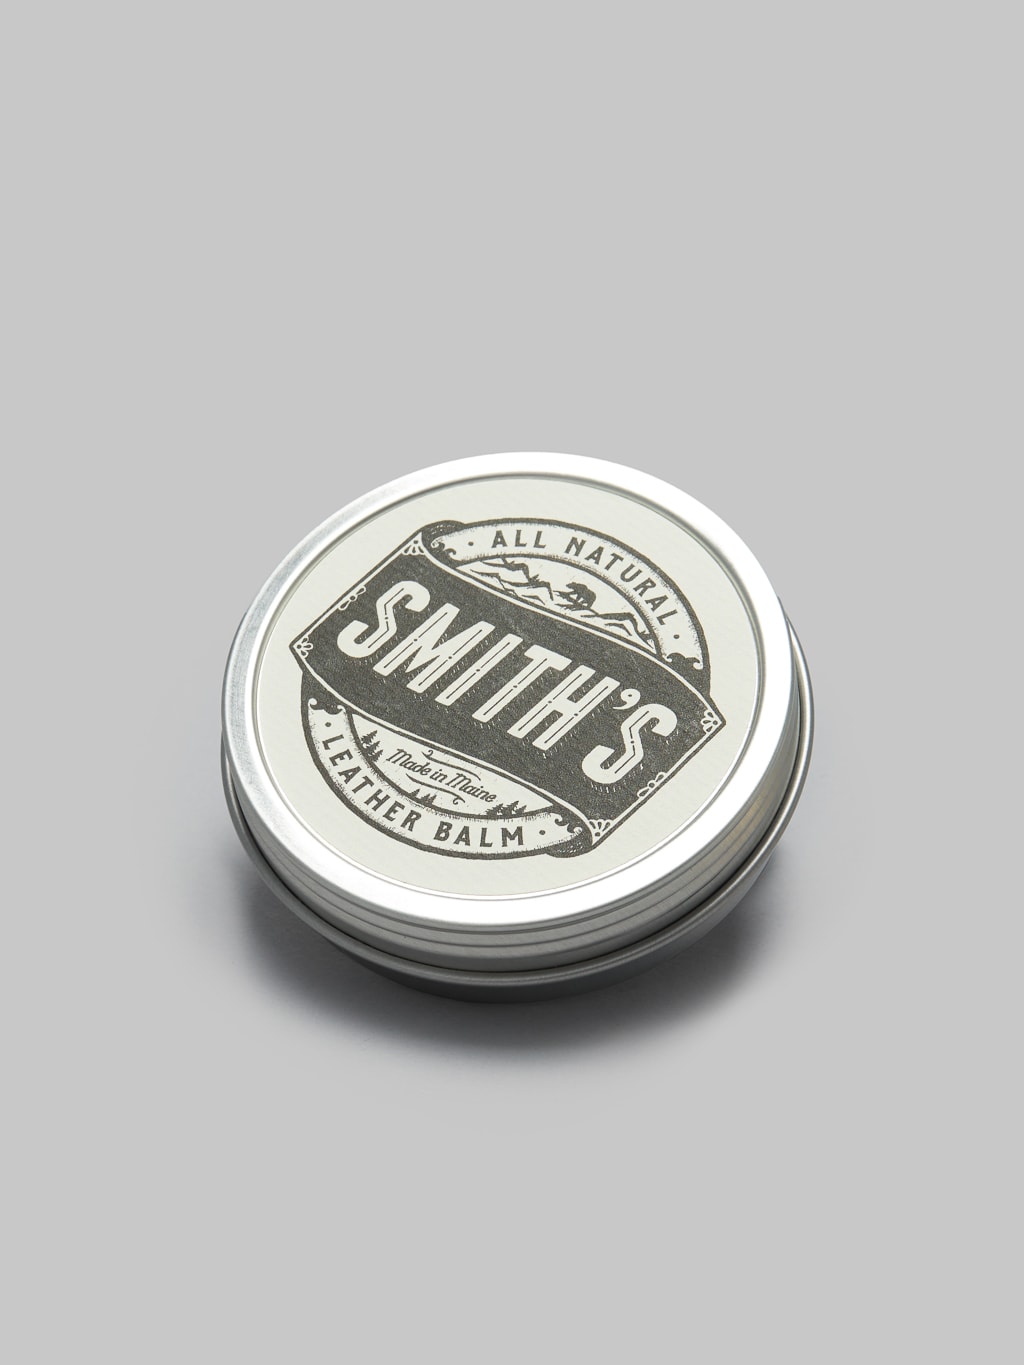 Smith s Leather Balm all natural